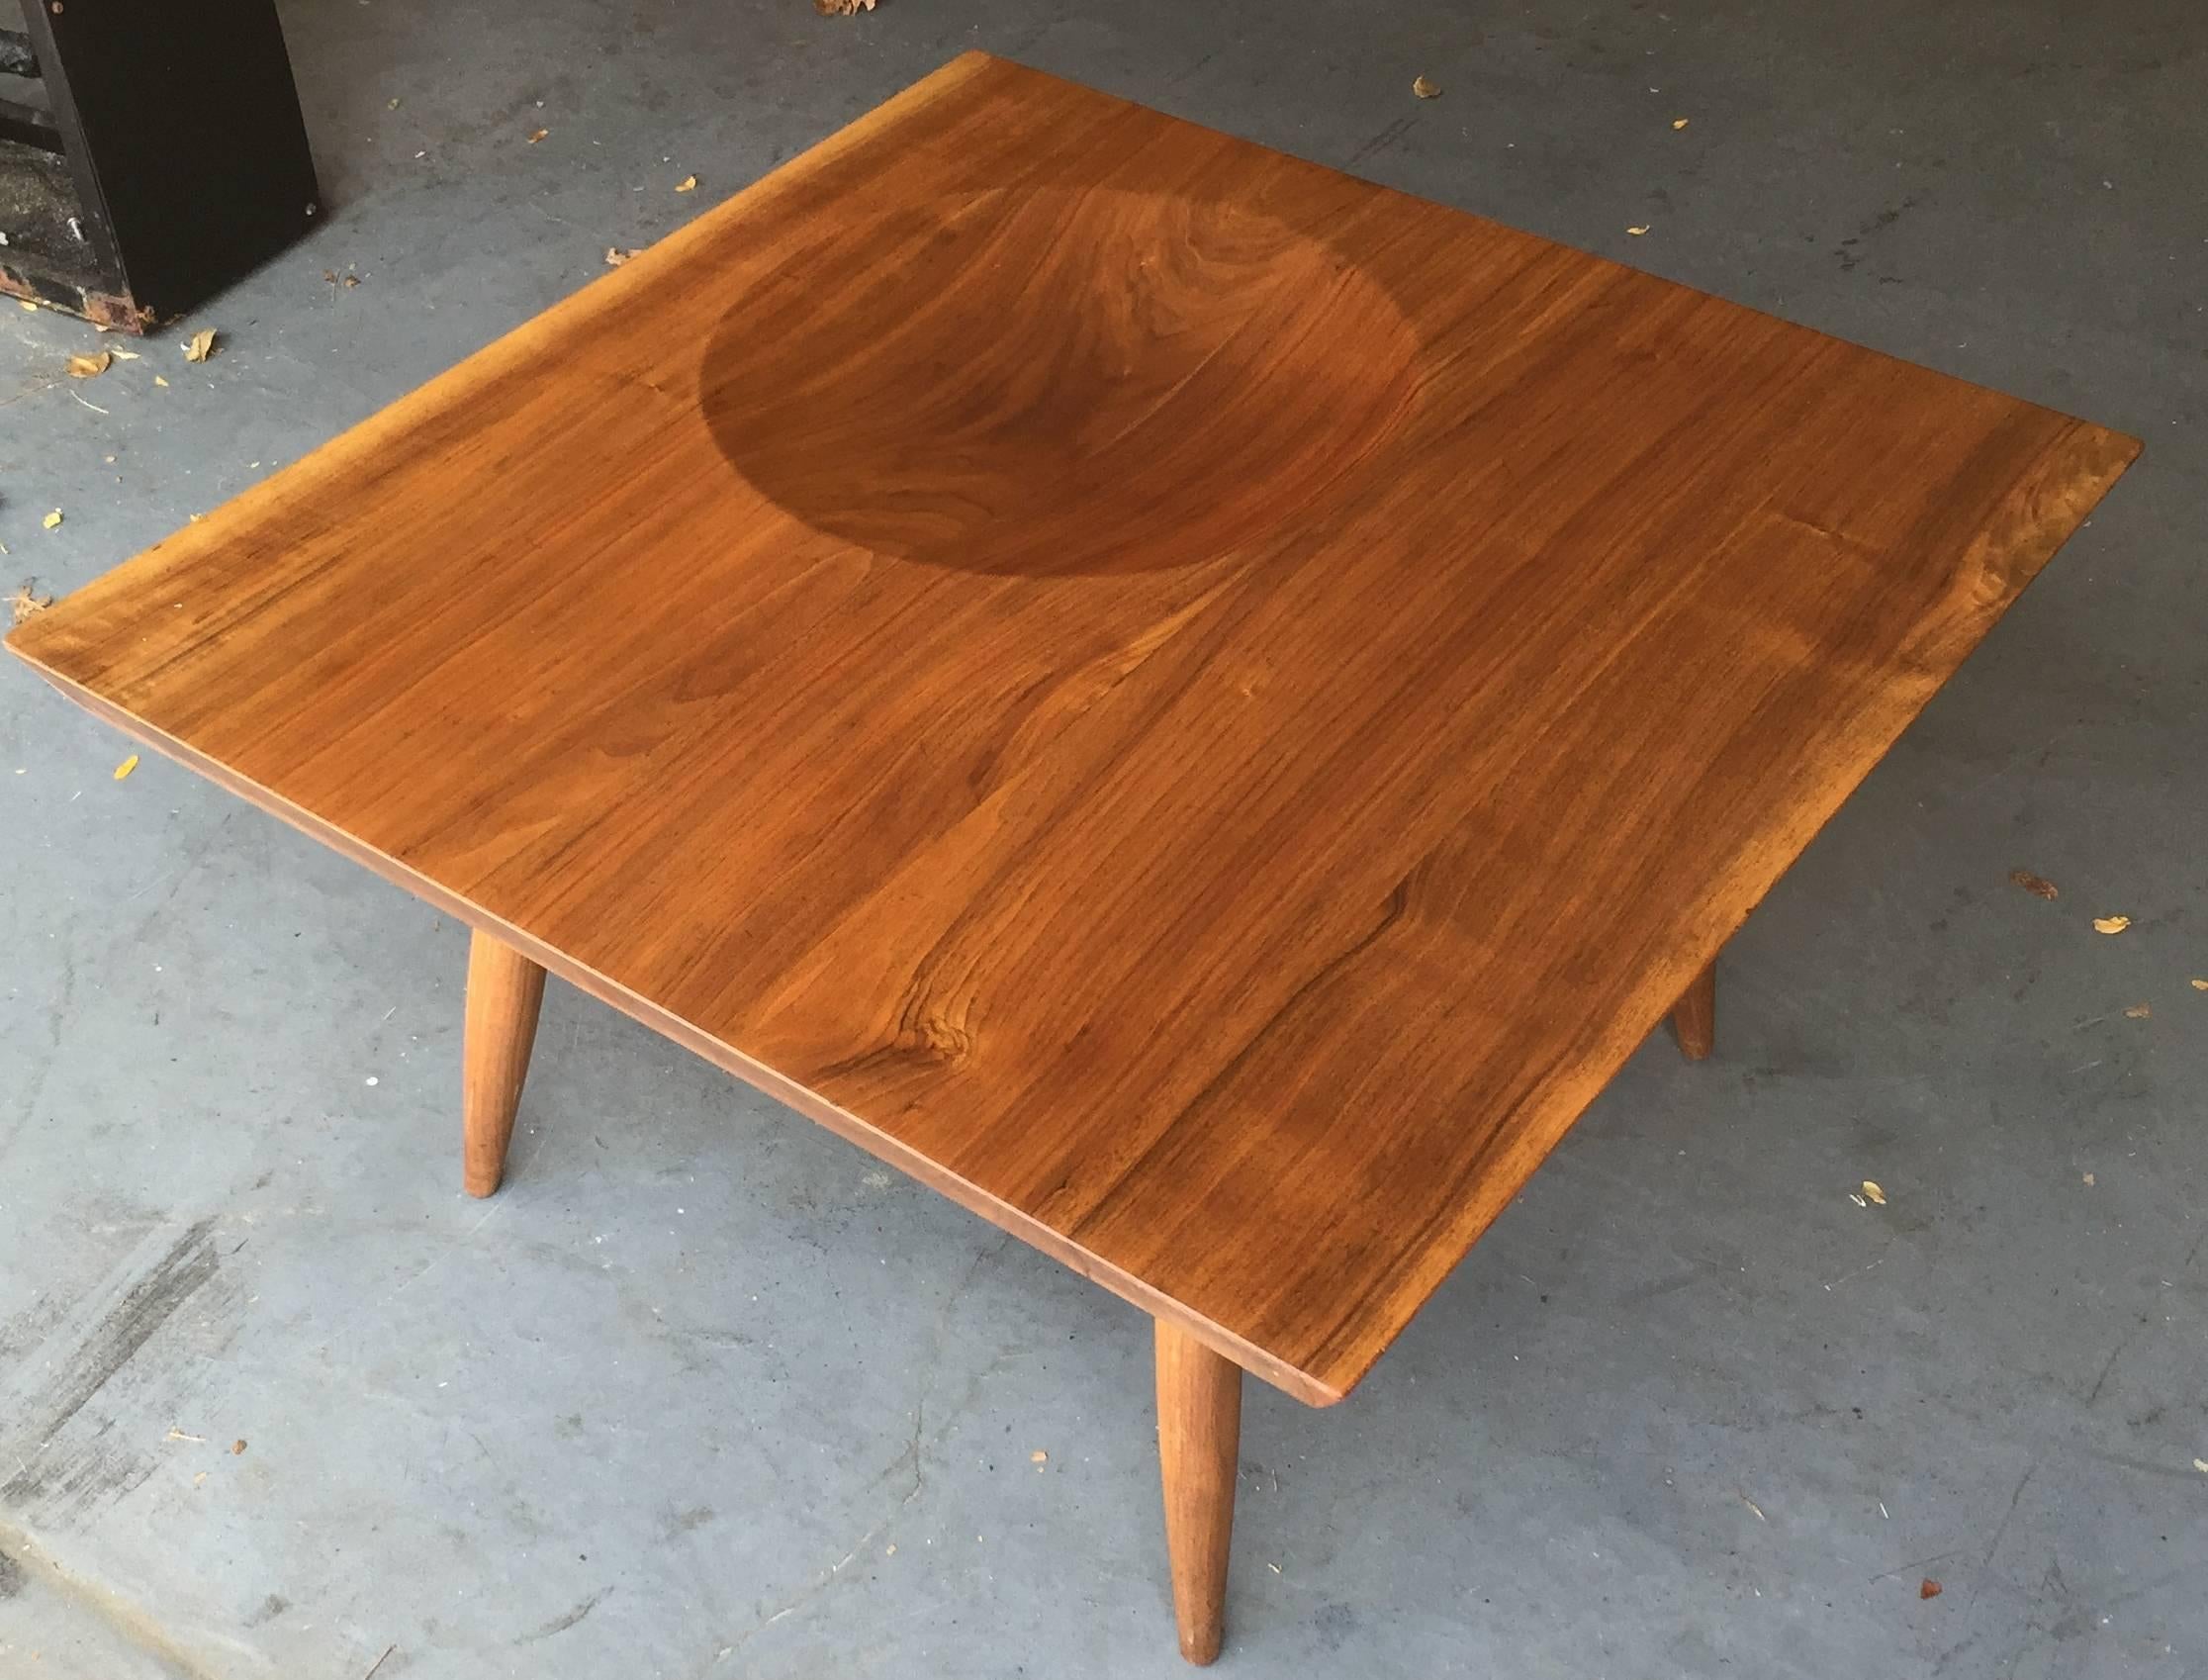 Wonderful 3' solid walnut top table. Expertly hand-carved, with sharply beveled edge and perfectly round bowl-shaped divet and dramatically tapered dowel legs. Luminous wood grain was hand-finished in linseed. Unsigned but likely made by a craftsman